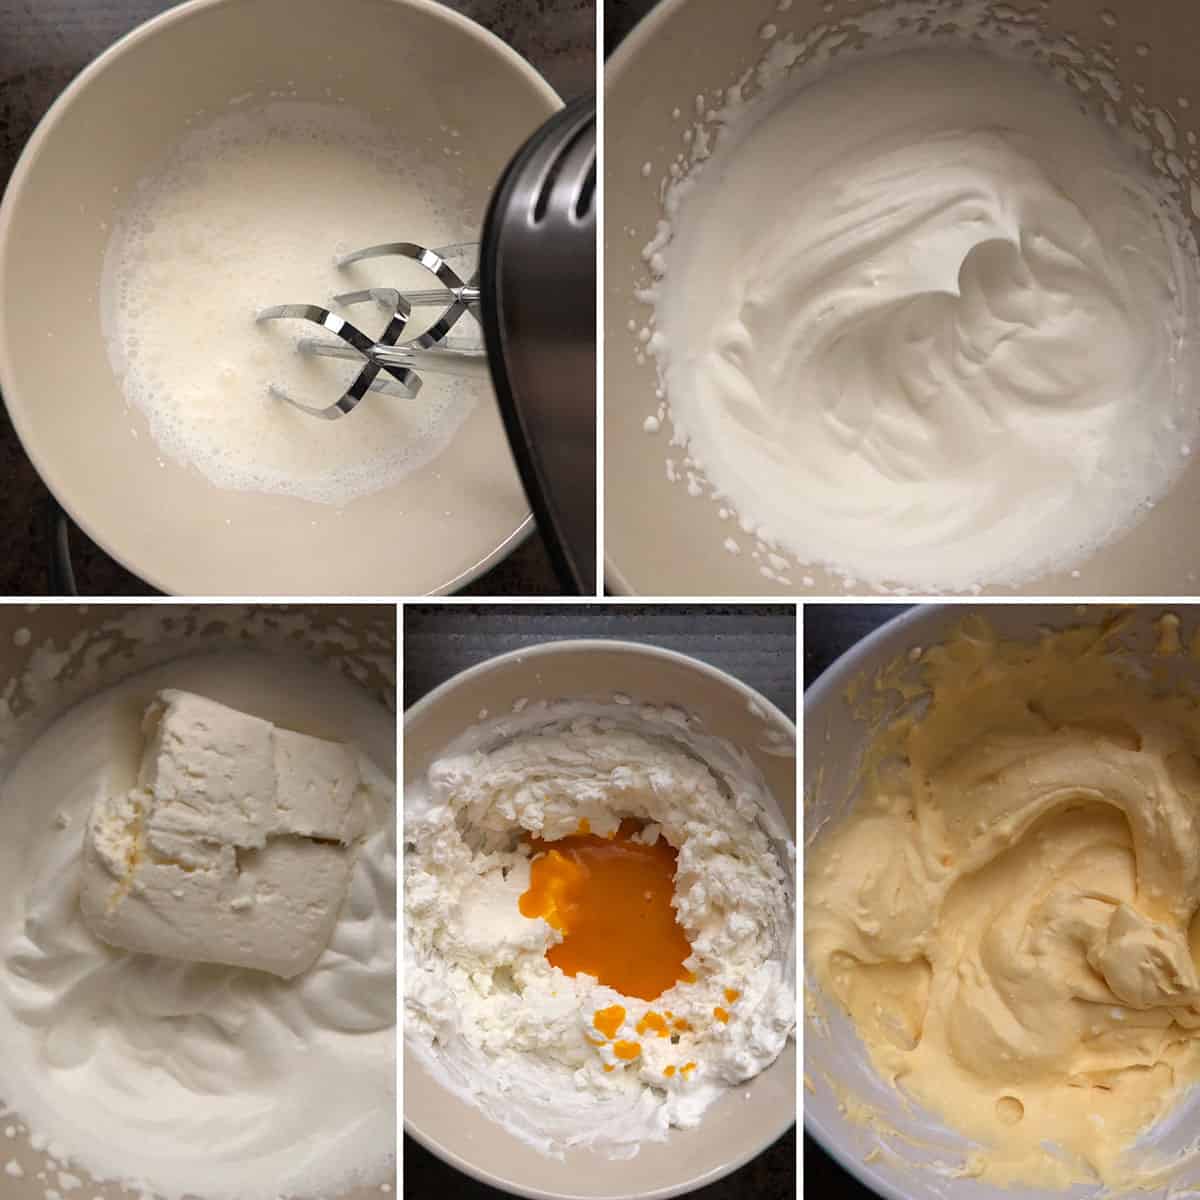 Step by step photos showing the making of mango frosting.